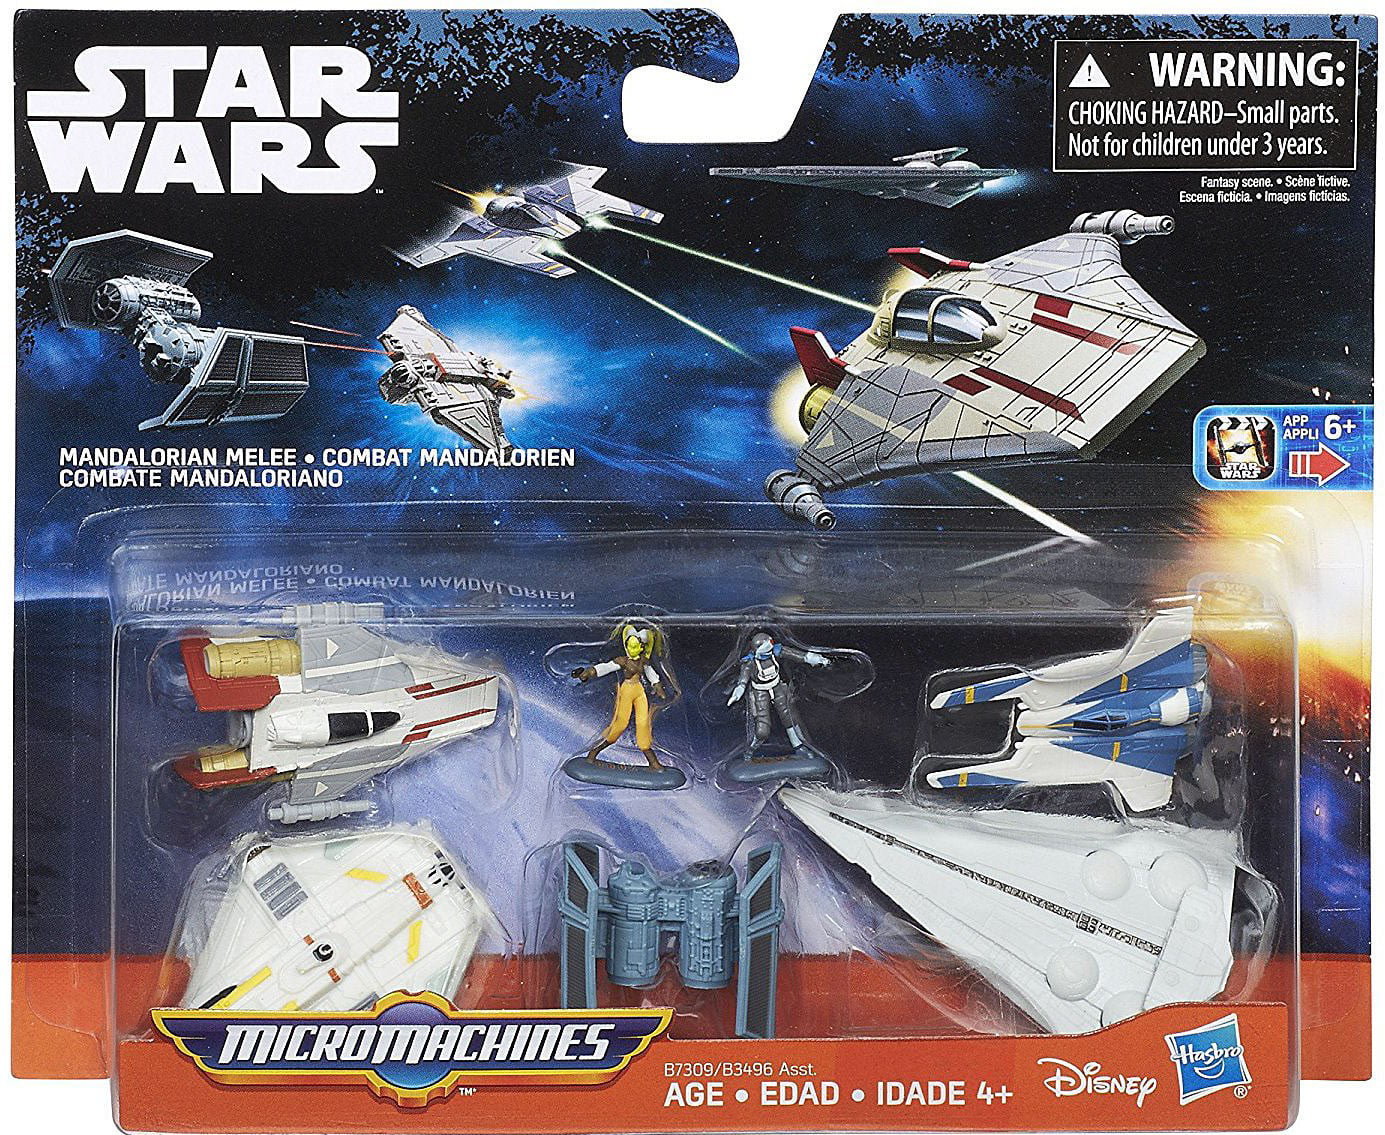 Ages 4+ Star Wars The Force Awakens Micro Machines SET OF FOUR 